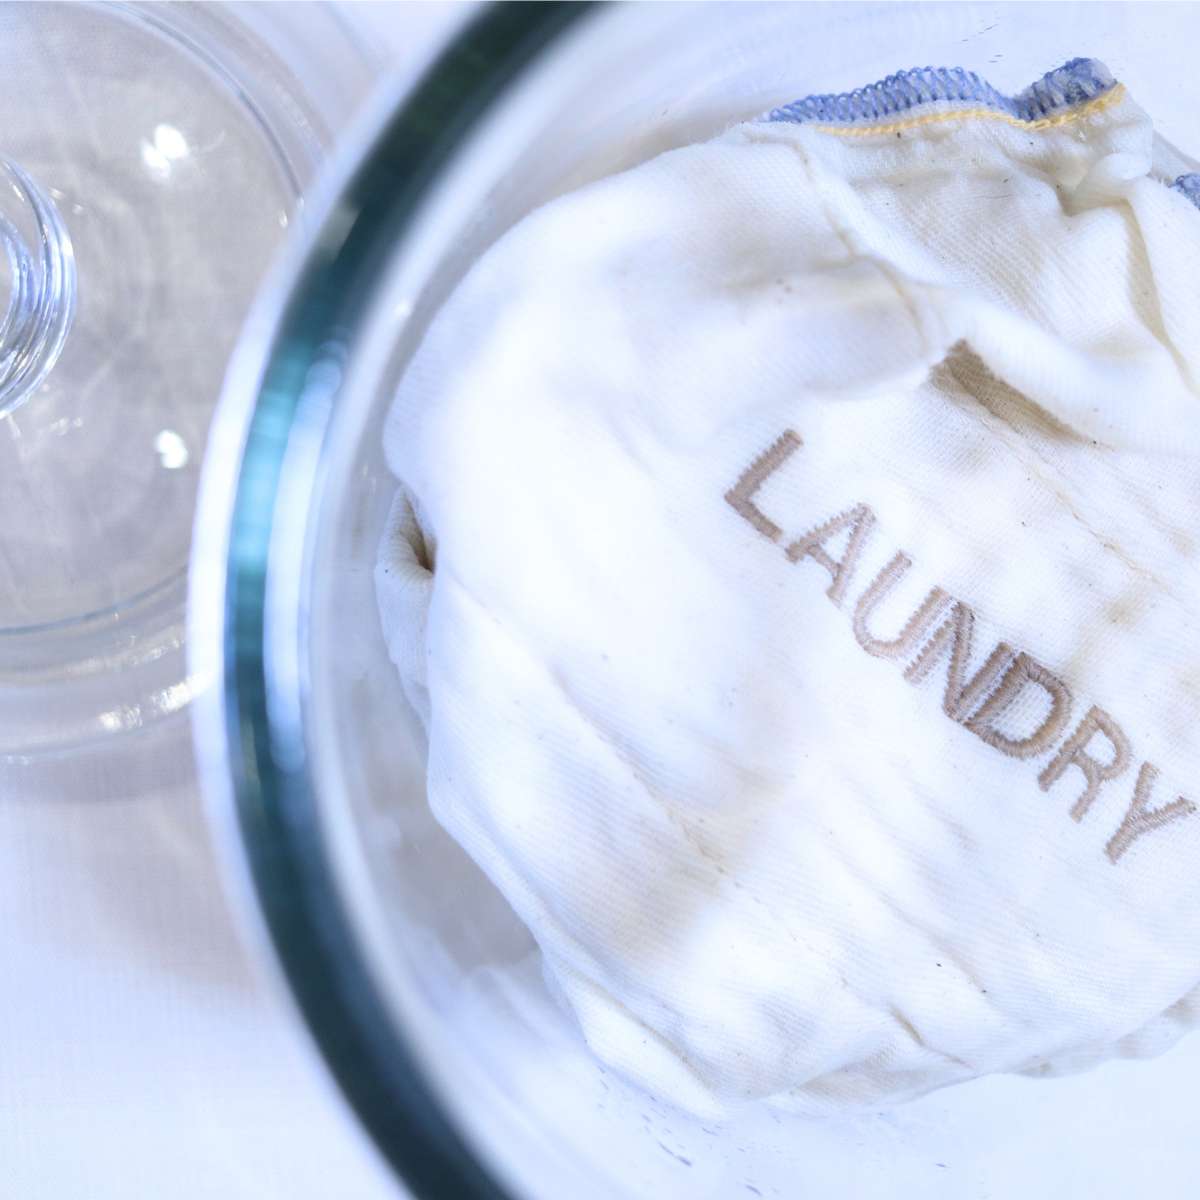 A clear glass jar full of ready to use homemade dryer sheets. The dryer sheets are a crisp white with blue stitching along the edges. The word laundry has been embroidered on the front of the cloth fabric sheets.